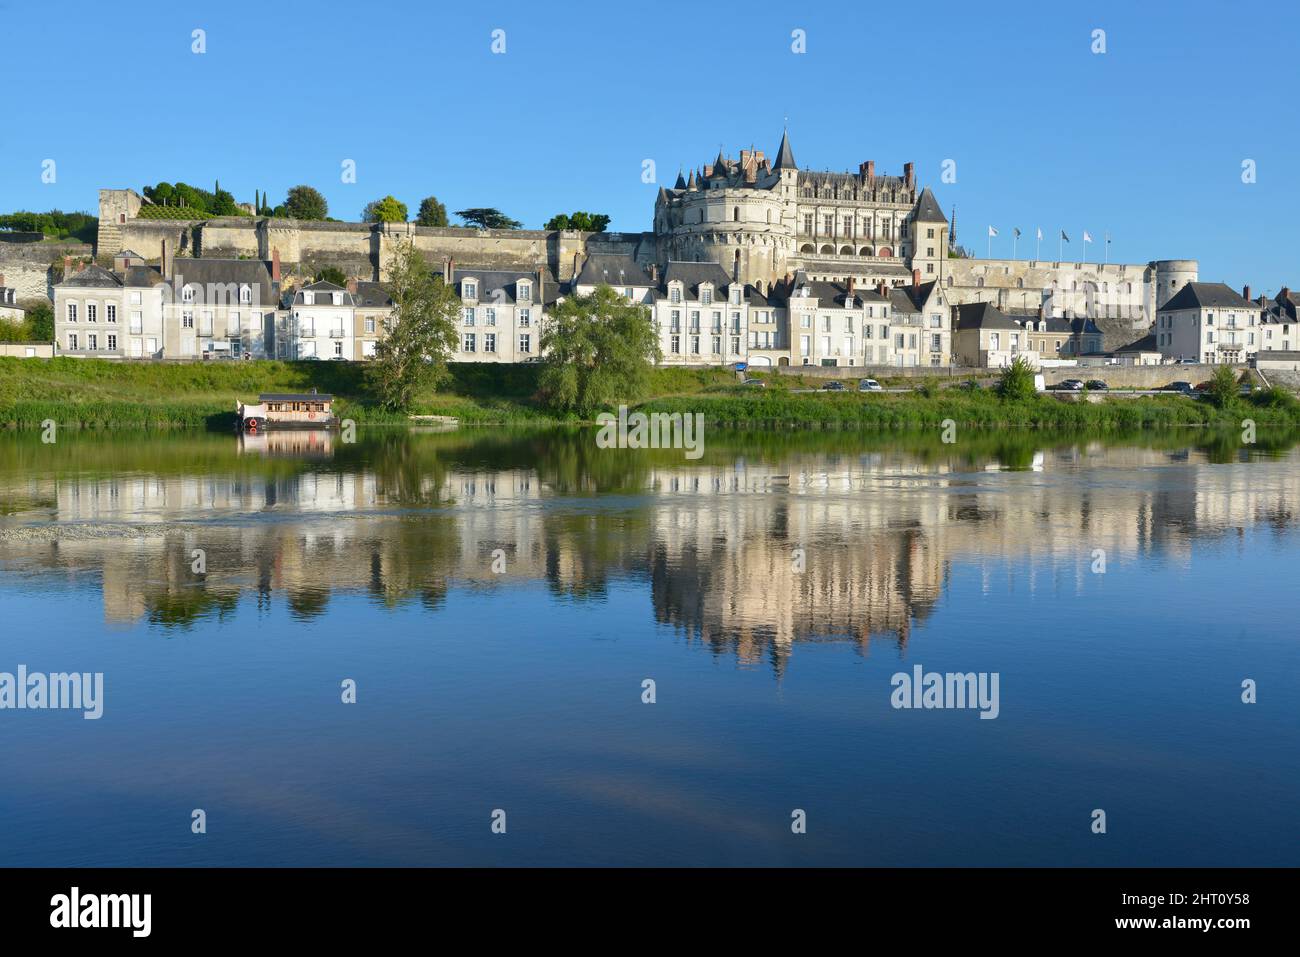 Magnificent castle very famous with its reflections on river Loire at Amboise, a commune in the Indre-et-Loire department in central France. Stock Photo